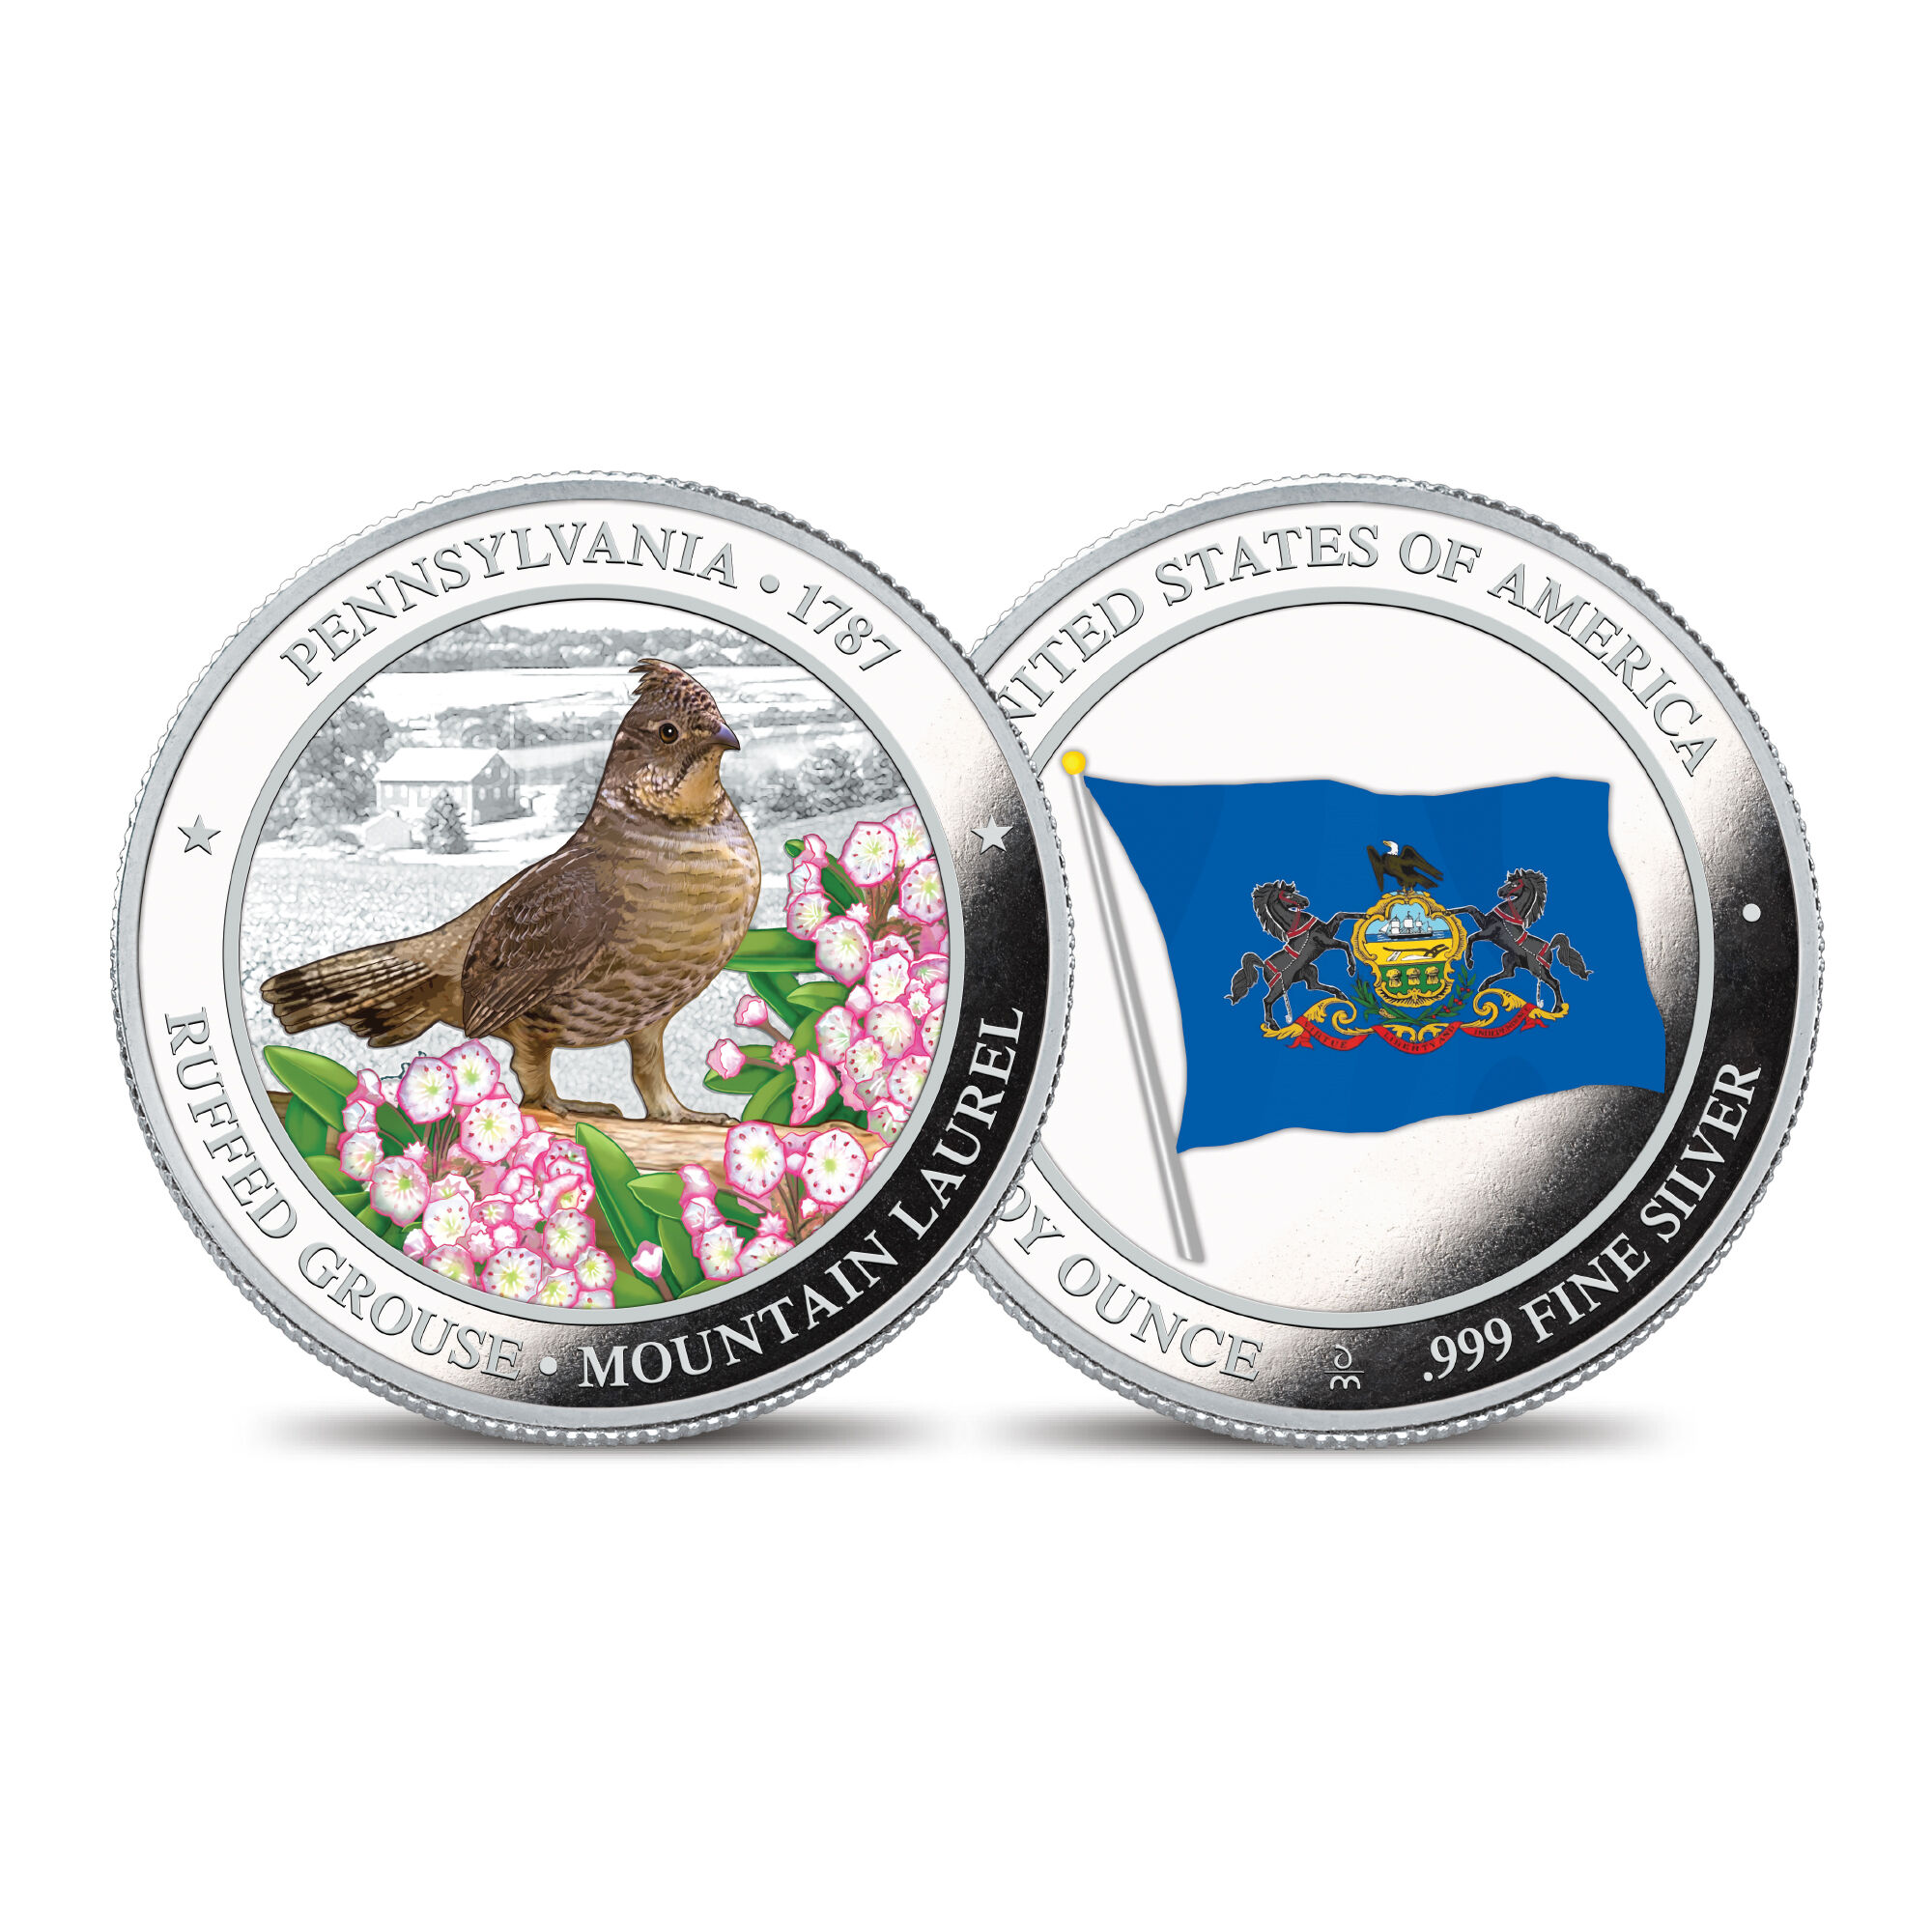 The State Bird and Flower Silver Commemoratives 2167 0088 a commemorativePA